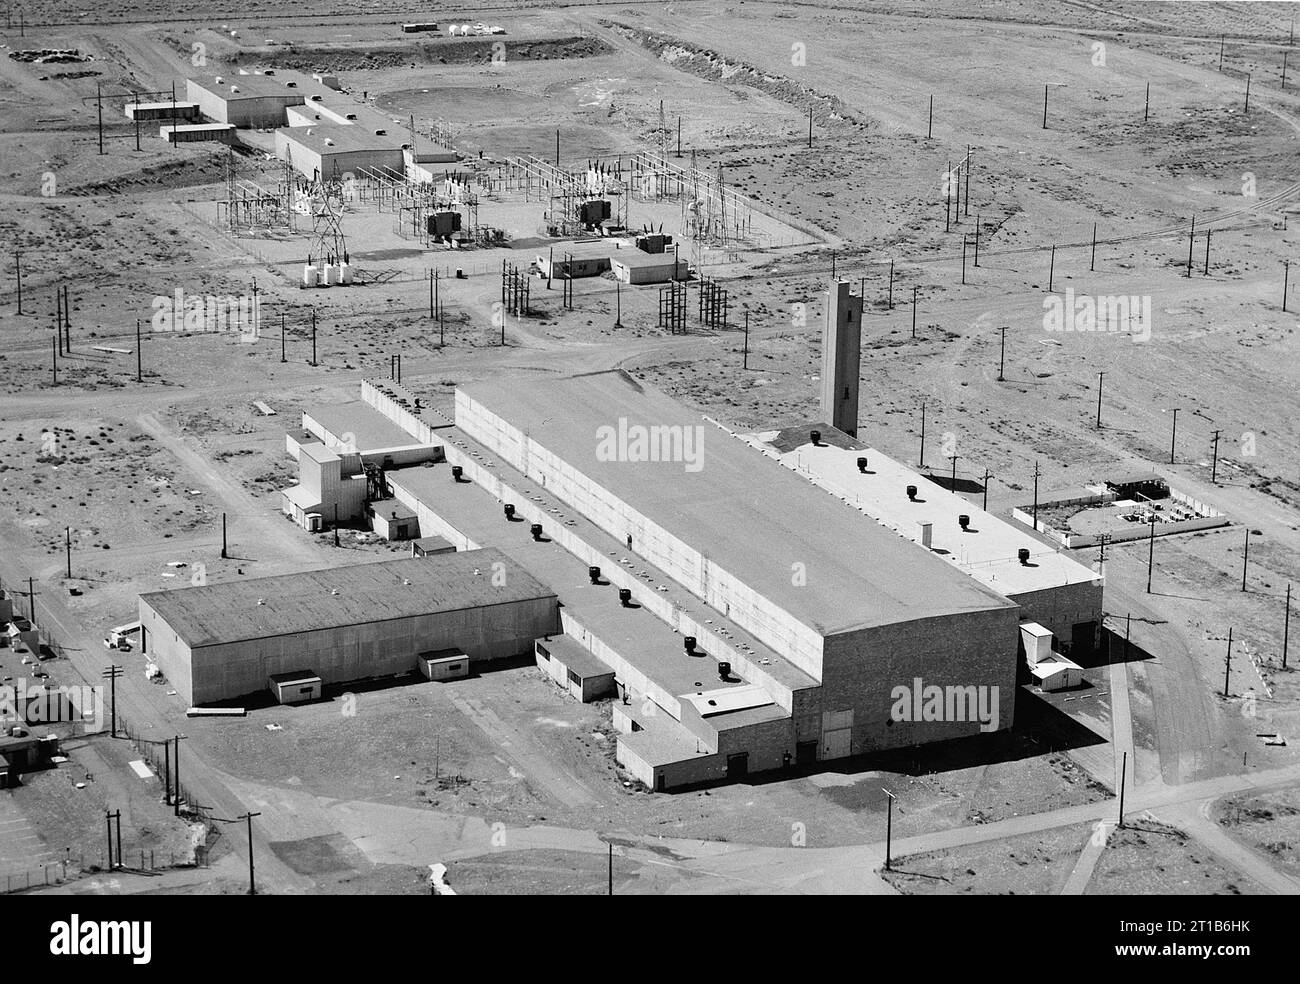 D-Reactor complex, Area 100-D, constructed during Manhattan Project and World War II, Richland, Benton County, Washington, USA, Historic American Engineering Record Stock Photo